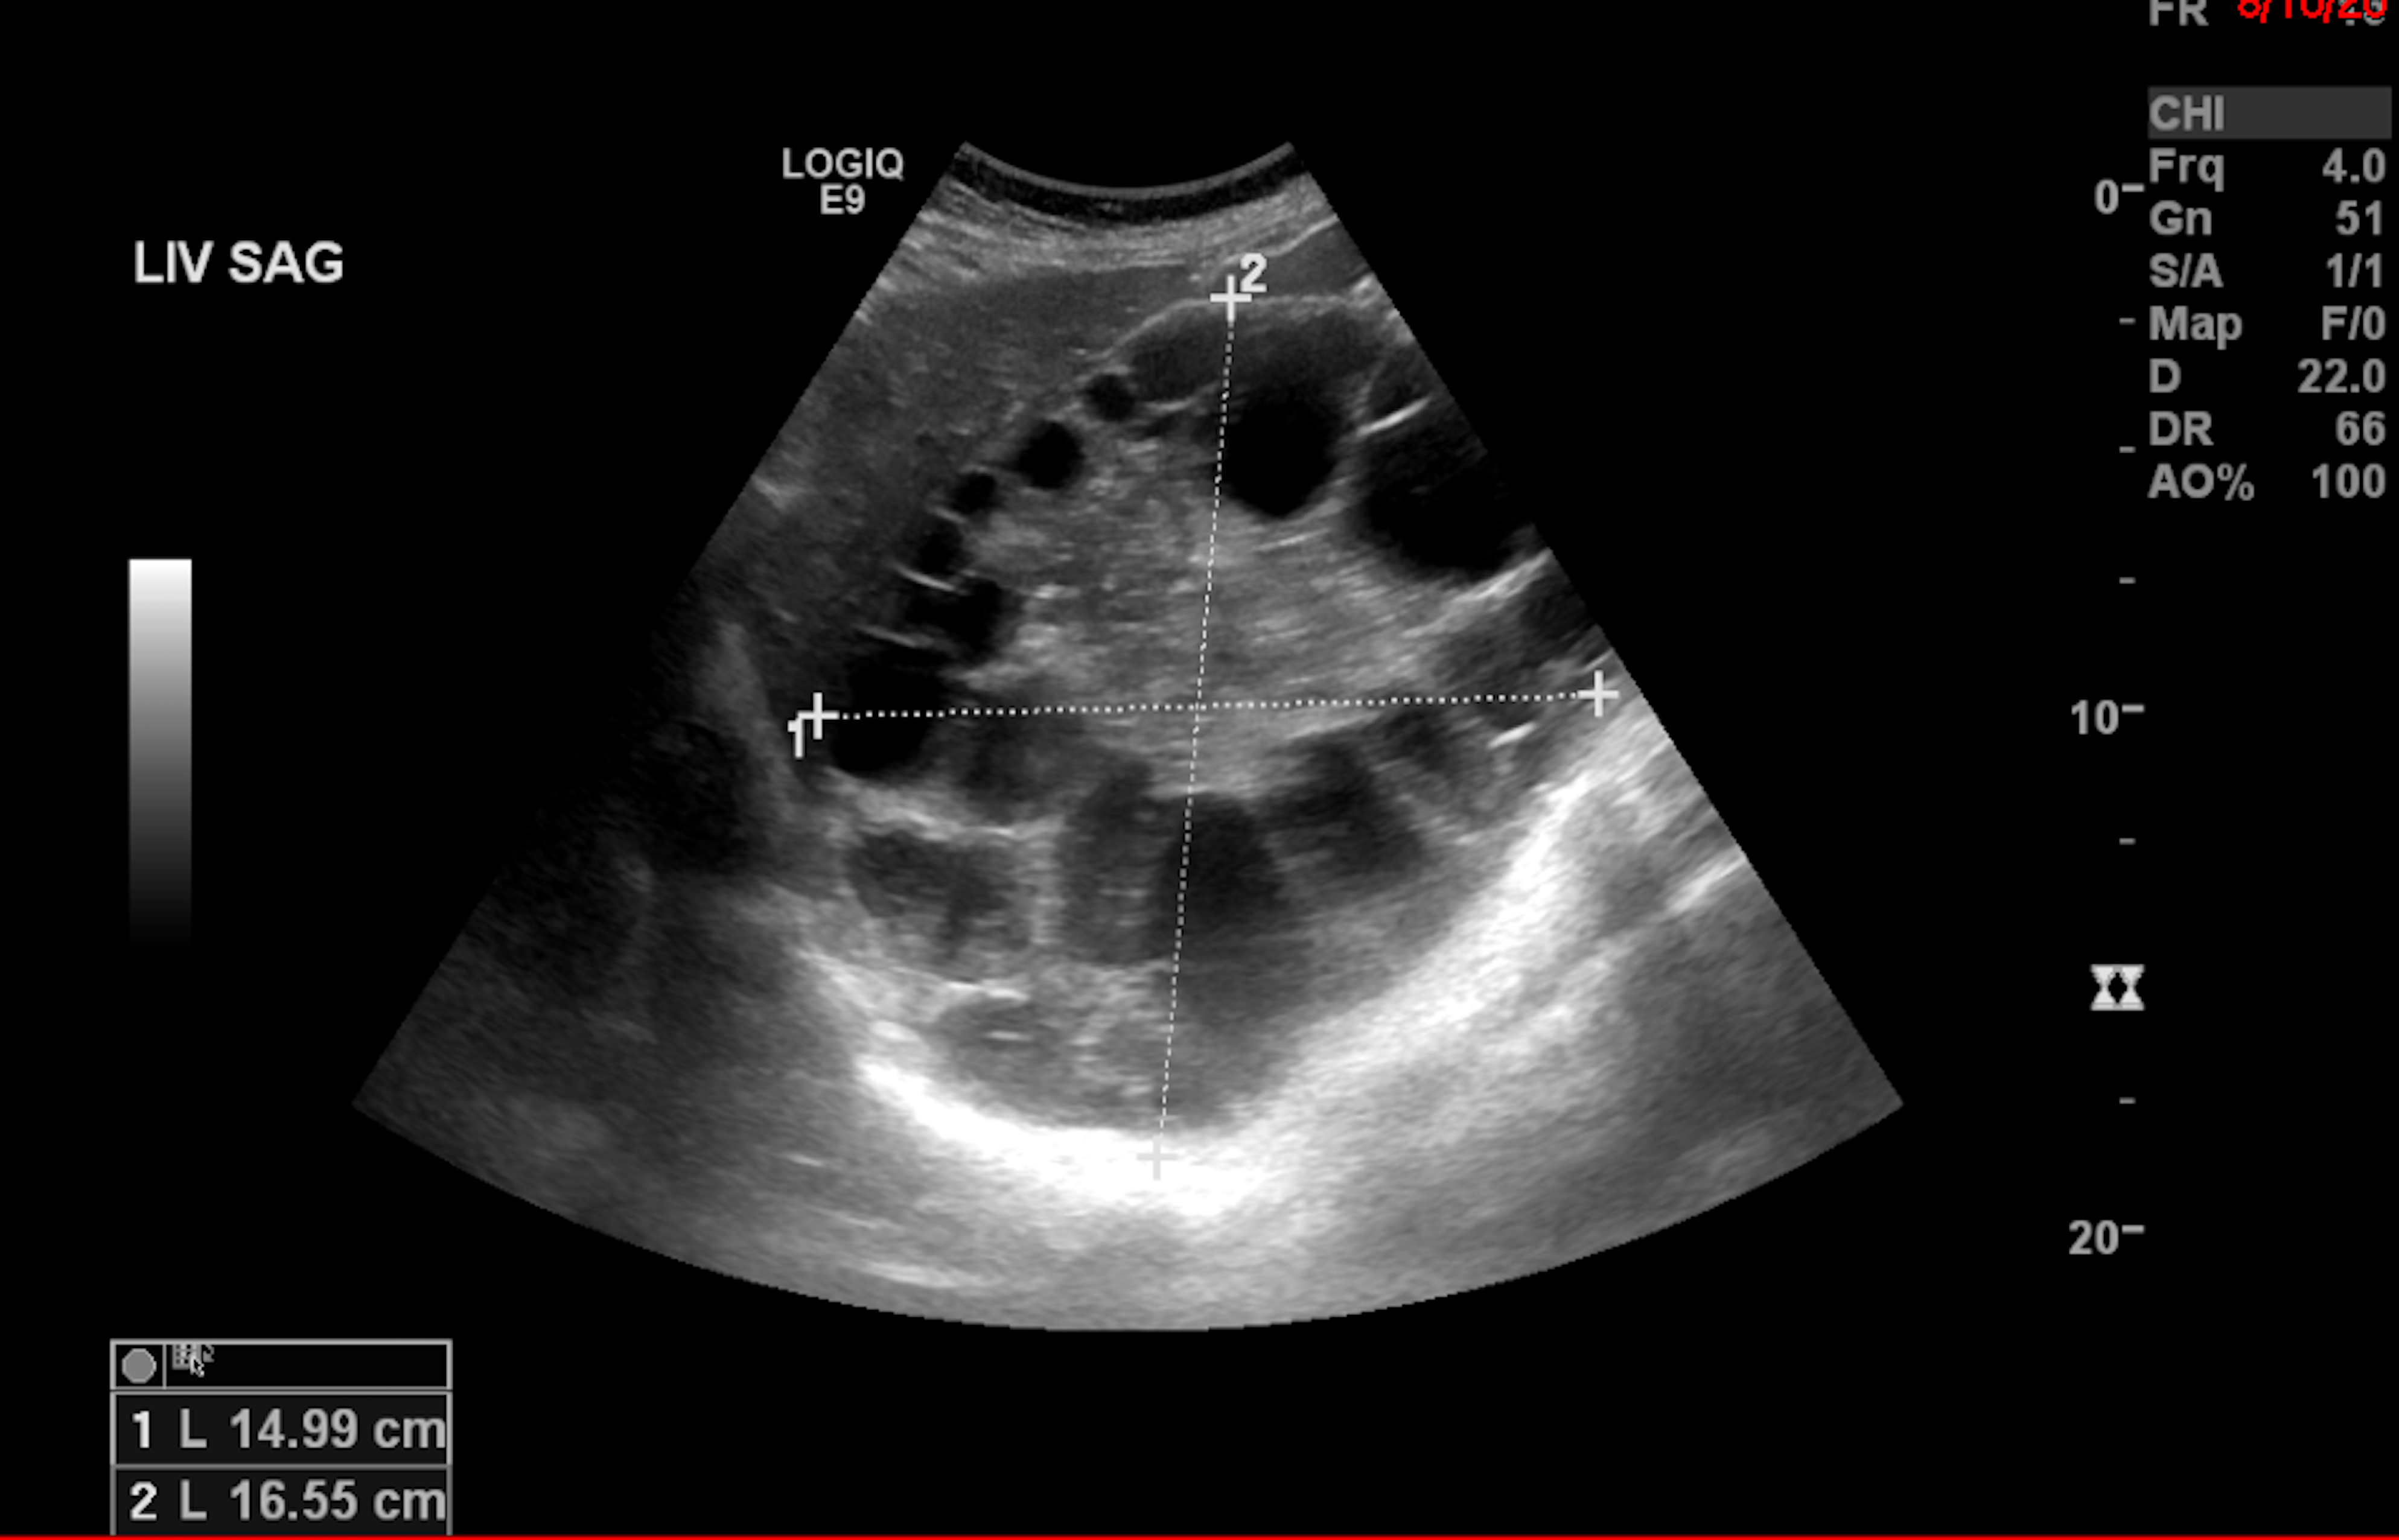 Hydatid Cyst Image 1 Ultrasound In Resource Limited Settings A Case